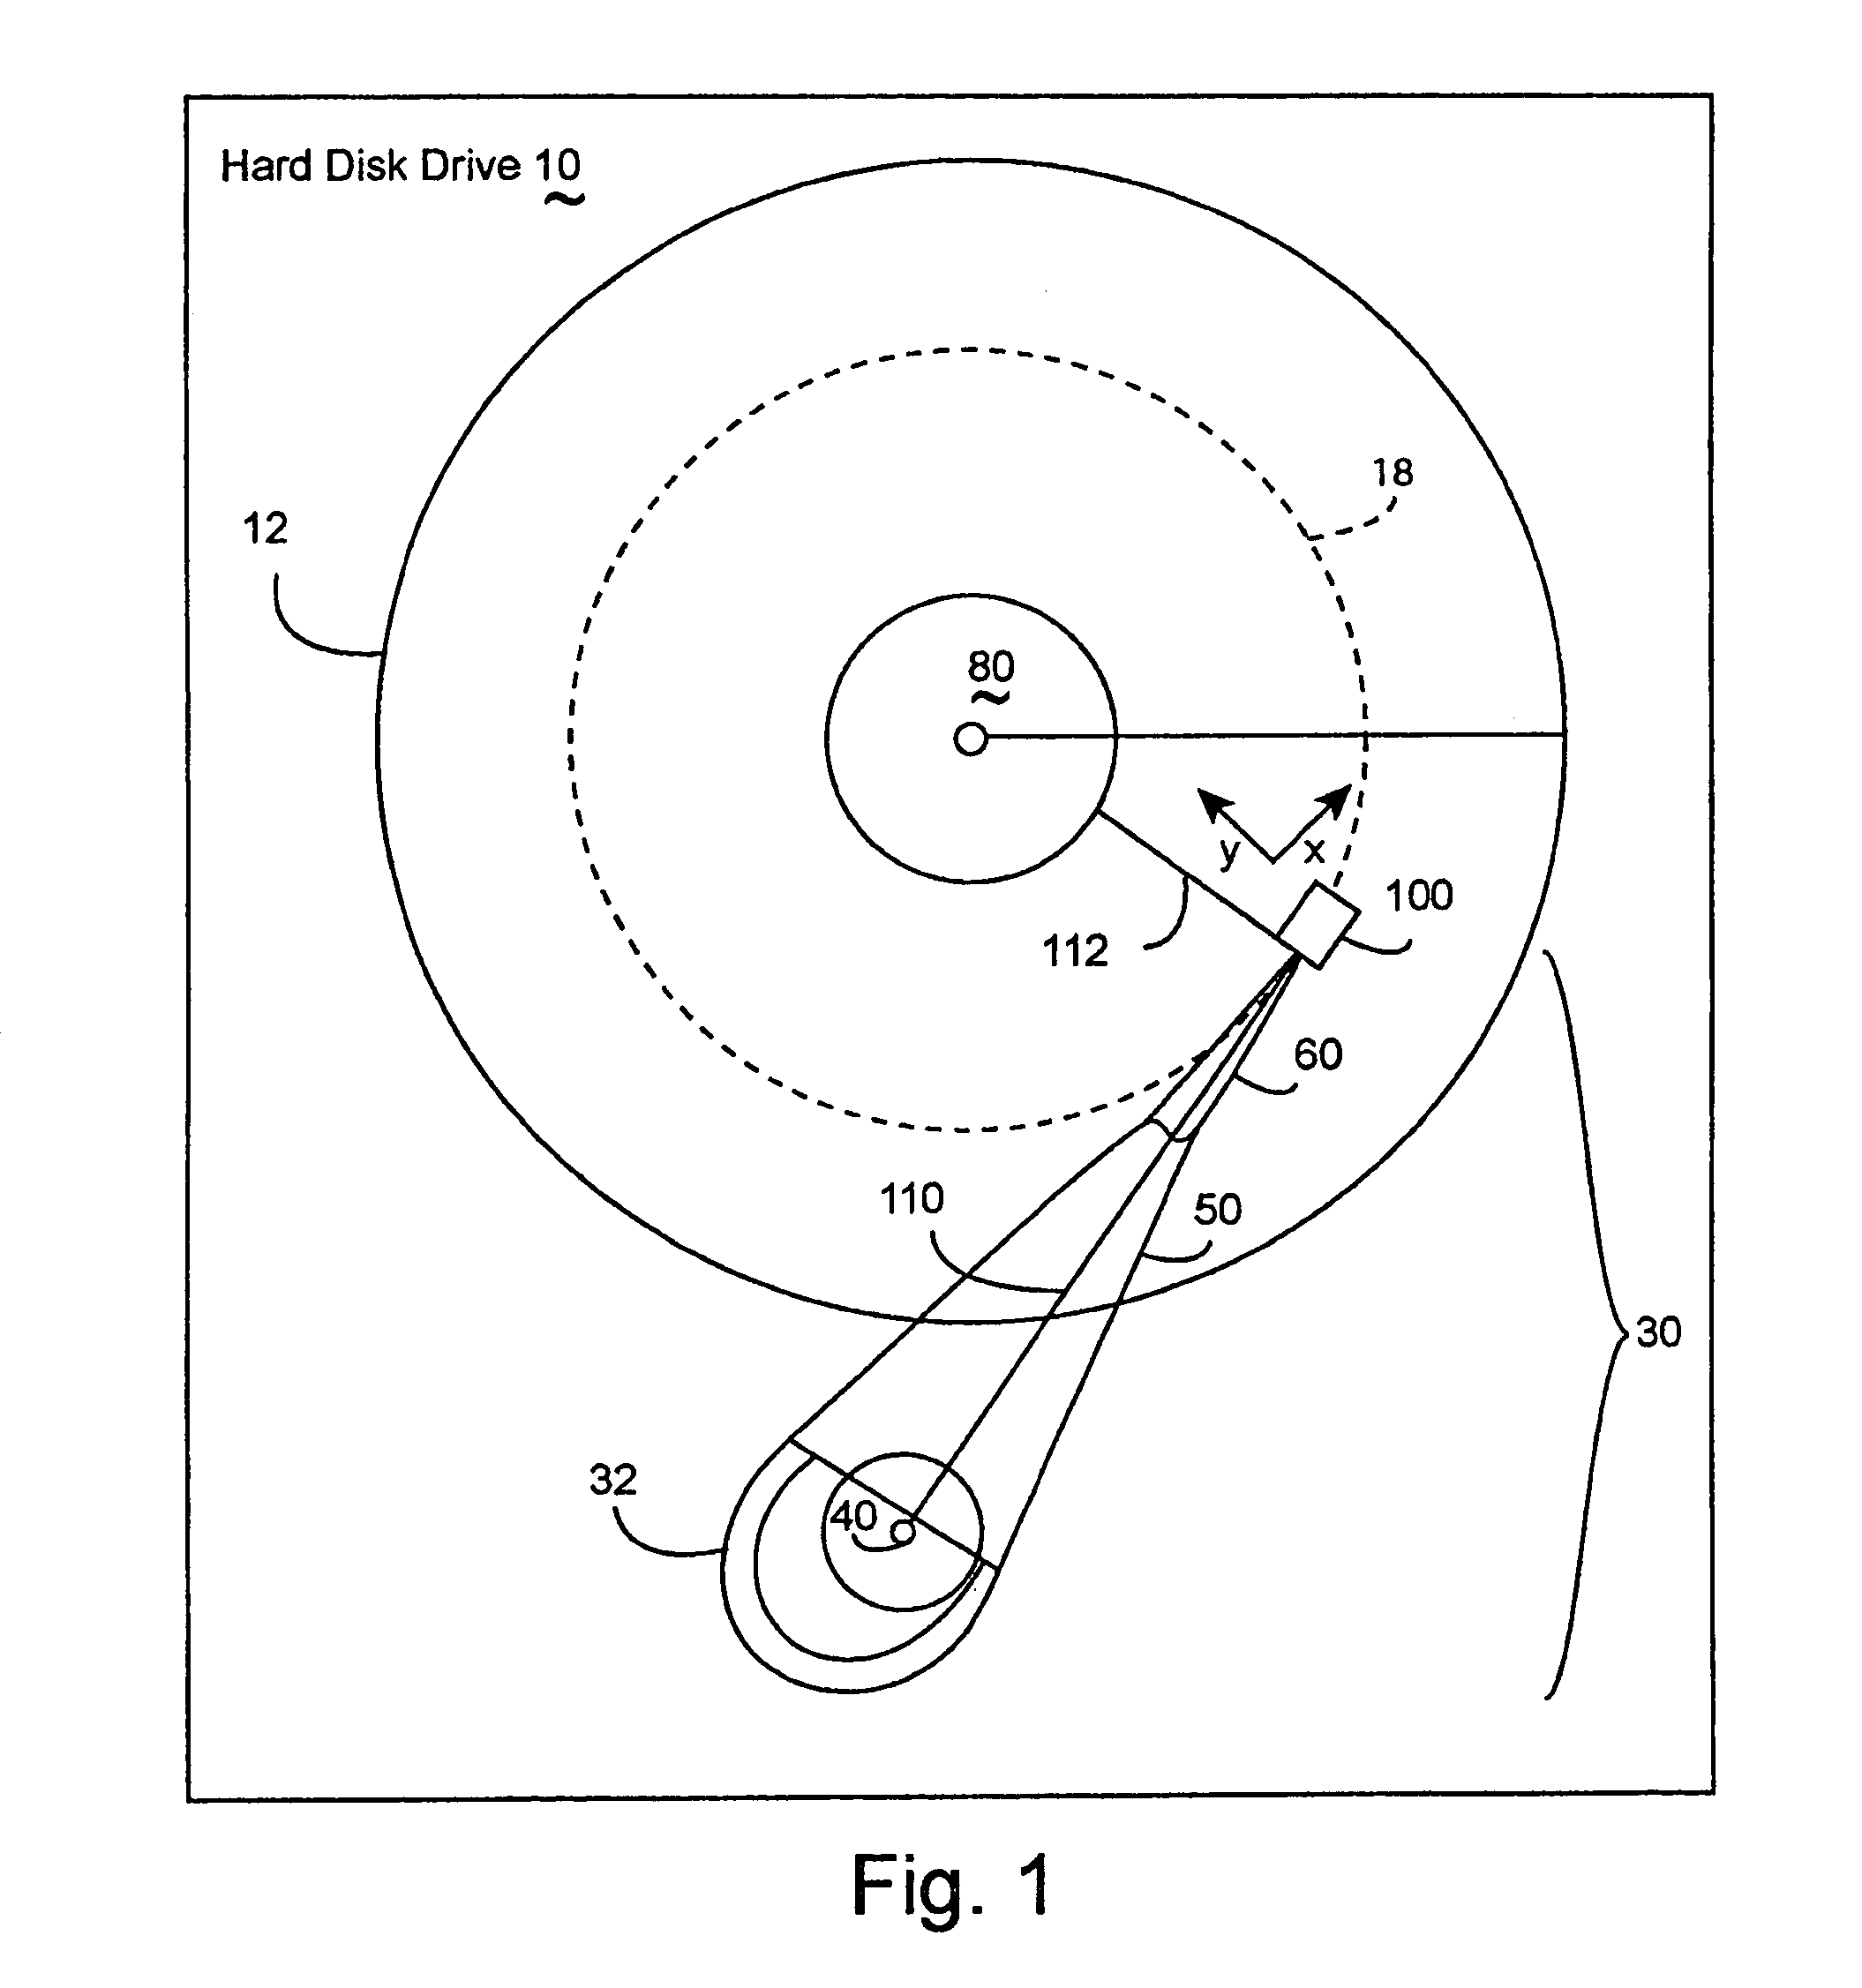 Method and apparatus reducing off track head motion due to disk vibration in a hard disk drive